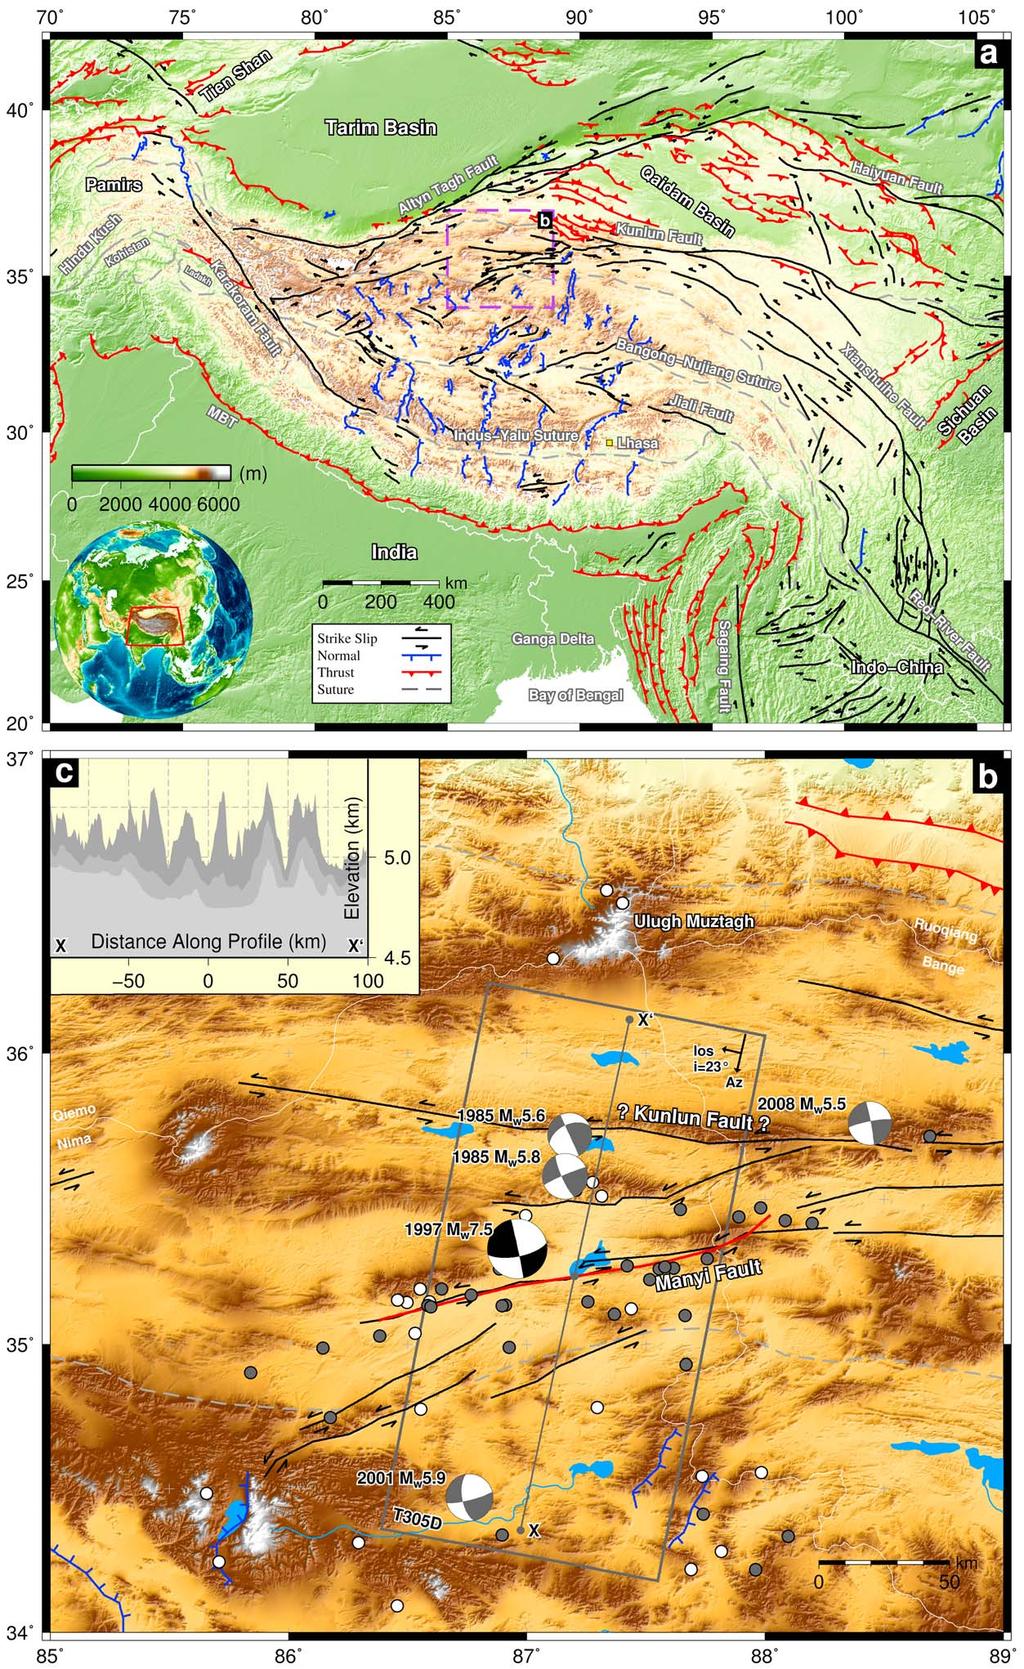 Figure 1. (a) Fault and topographic map of the Tibetan Plateau and immediate surrounding region, with the study area delineated by a purple dashed box. Faults are from [Taylor and Yin, 2009].